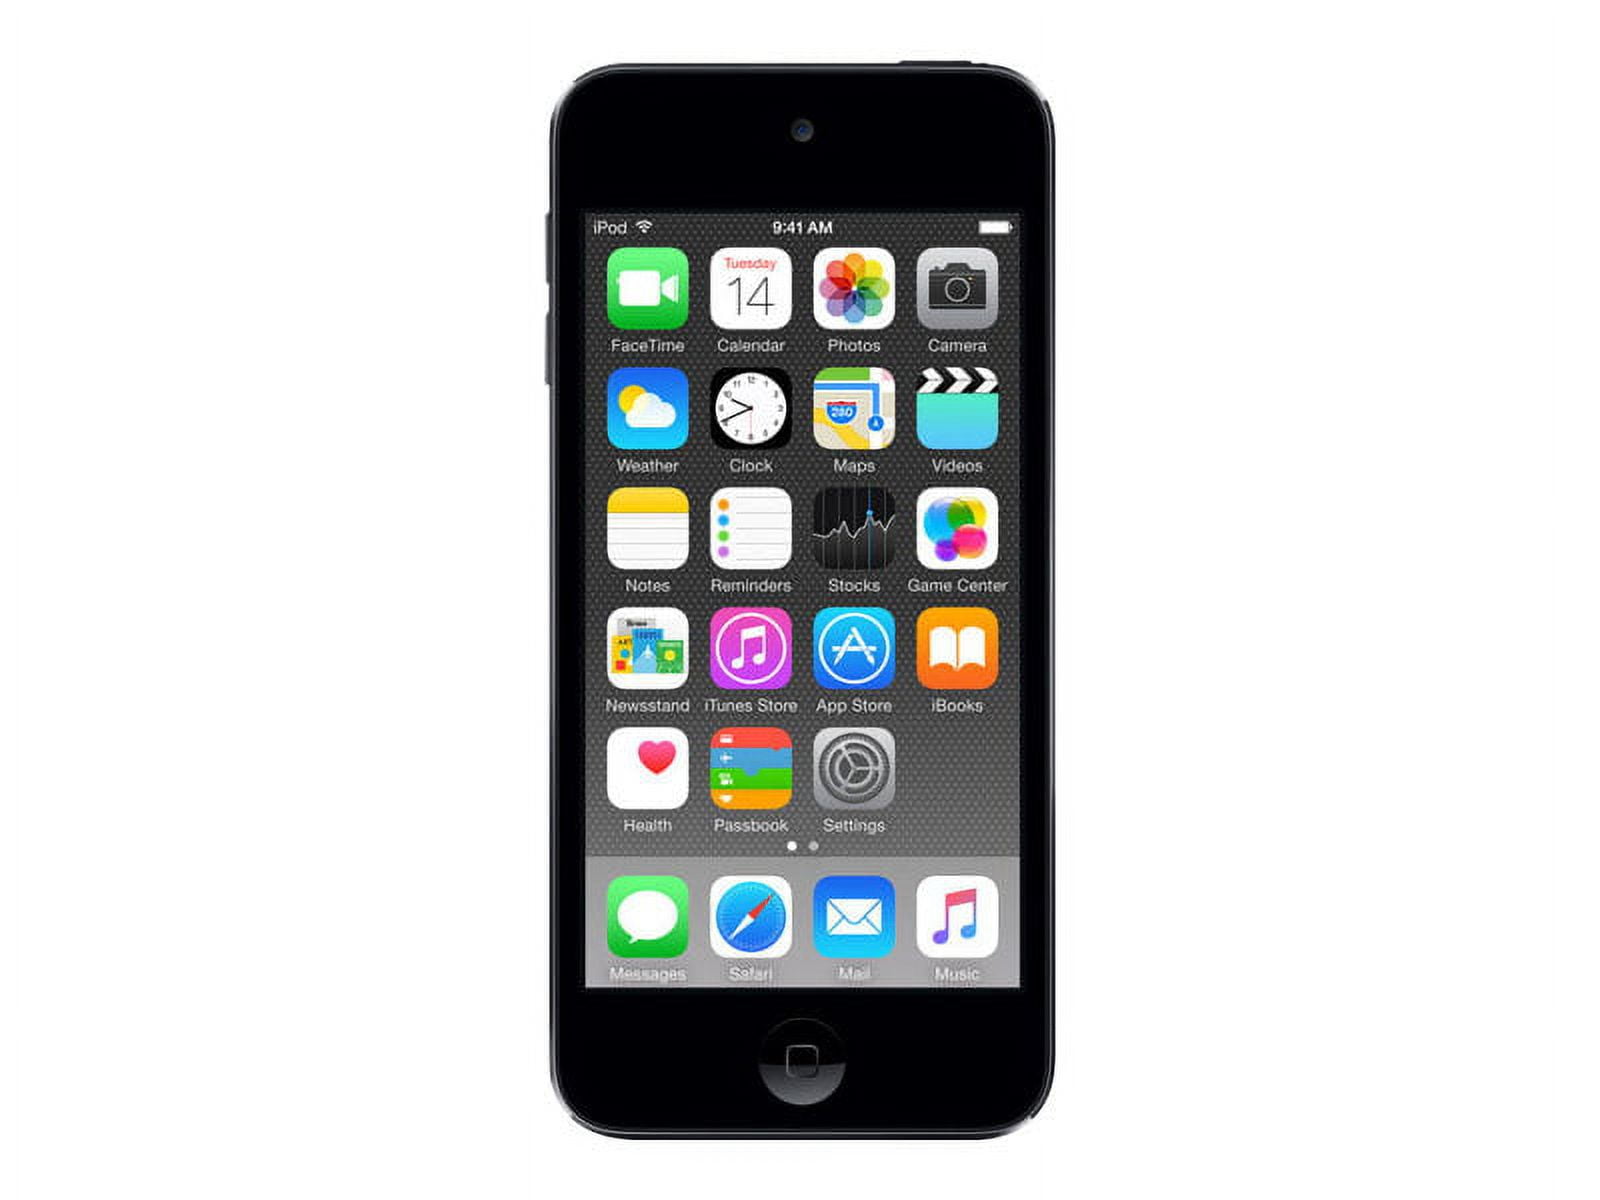 Apple iPod touch 32GB - Space Gray (Previous Model) - Walmart.com